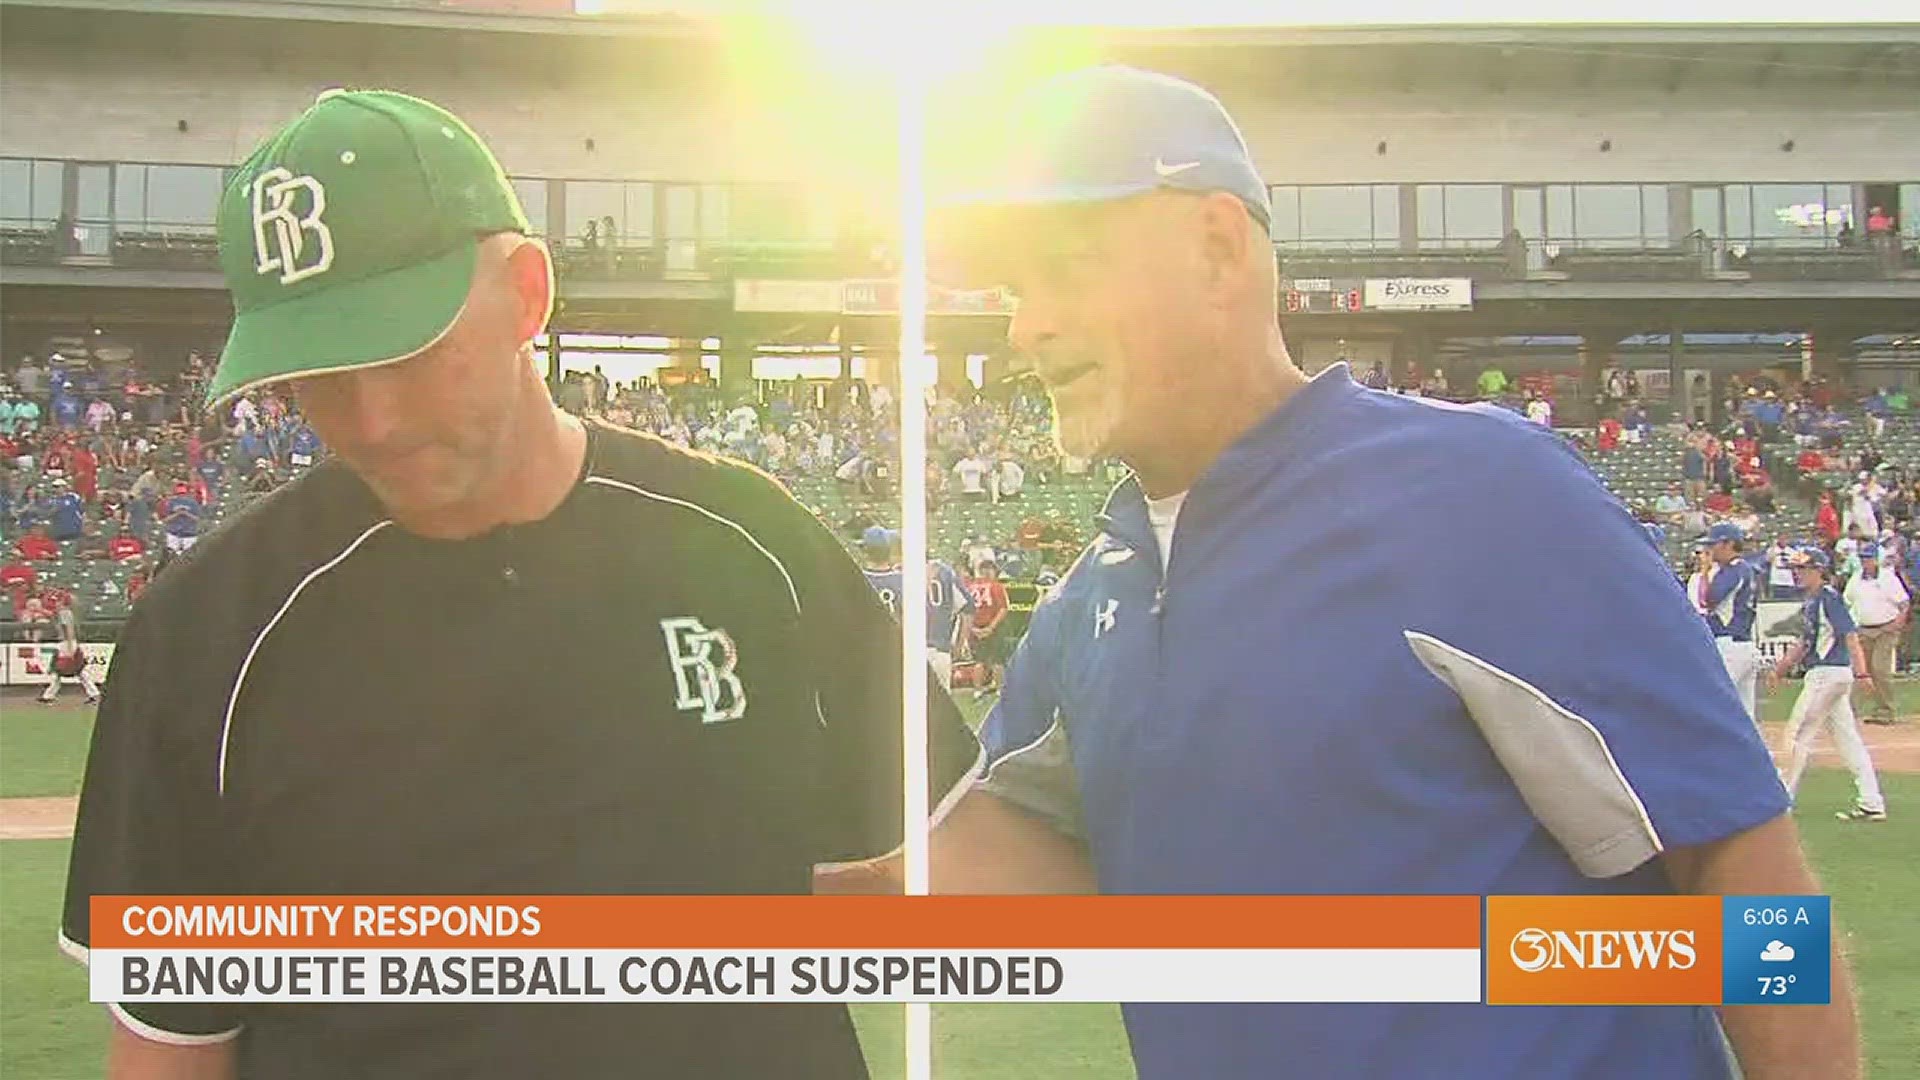 Coach Rusty Miller was recently suspended for unconfirmed reasons.